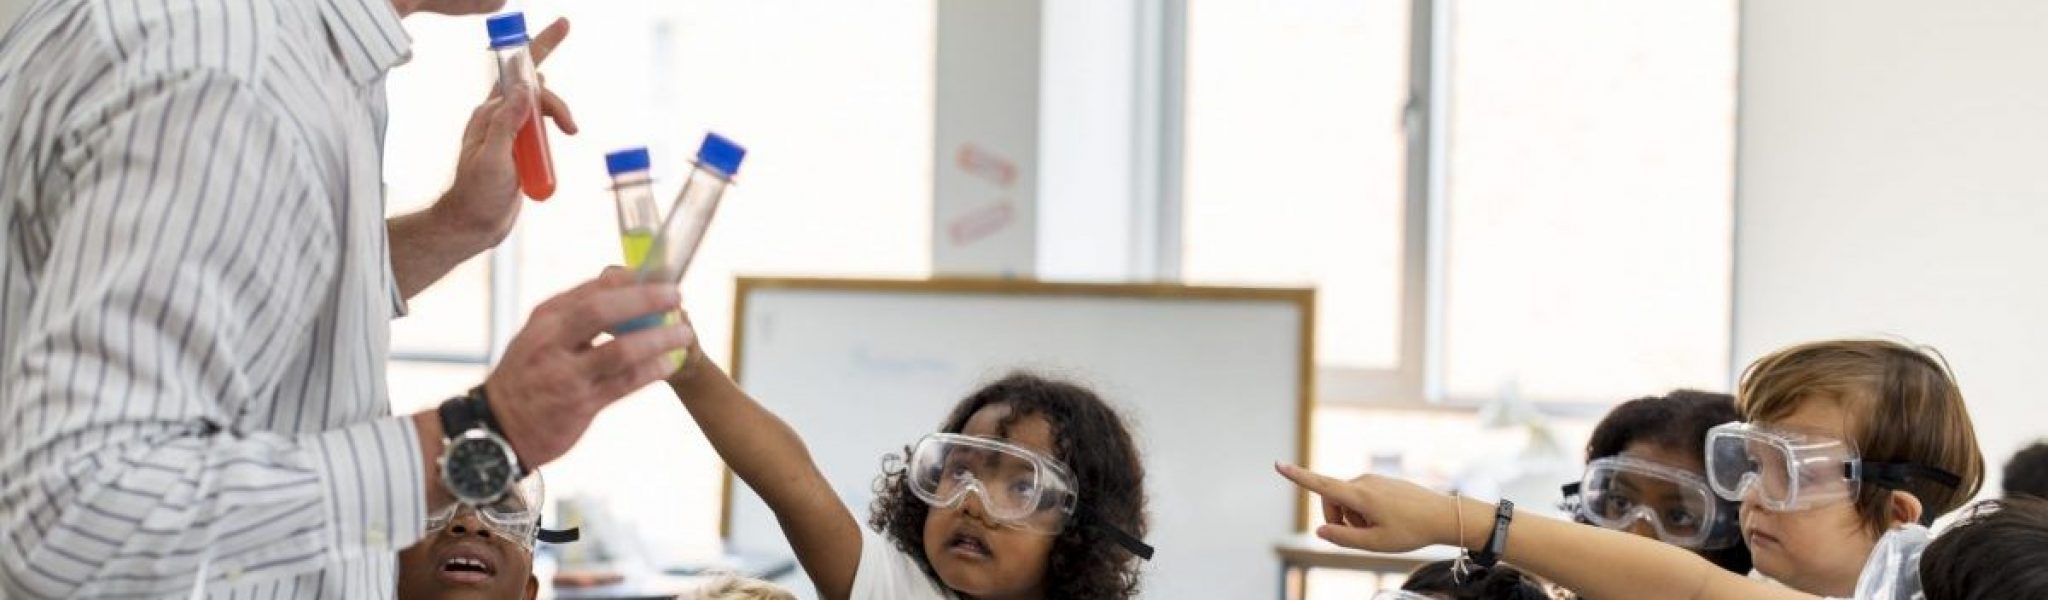 Kindergarten Students Learning in Science Experiment Laboratory Class